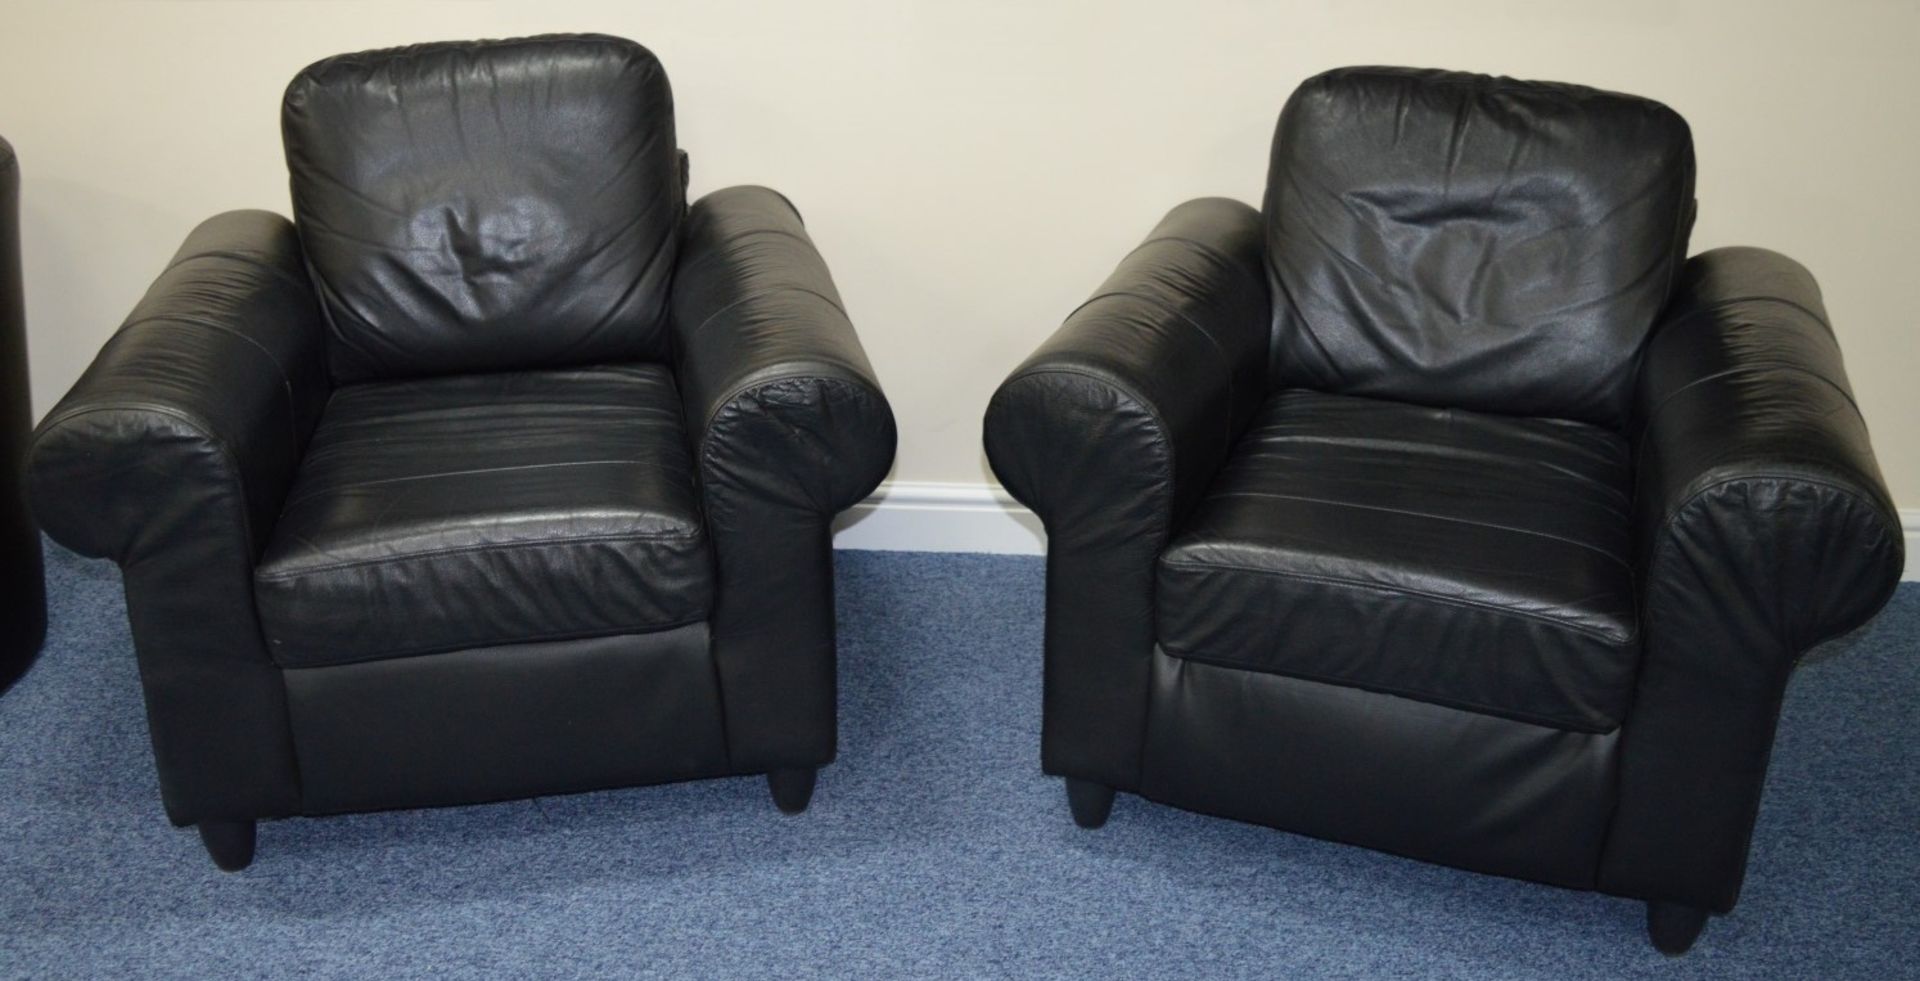 2 x Black Leather Armchairs - Contemporary Voluptuous Chairs in Black Leather - H85 x W94 x D86